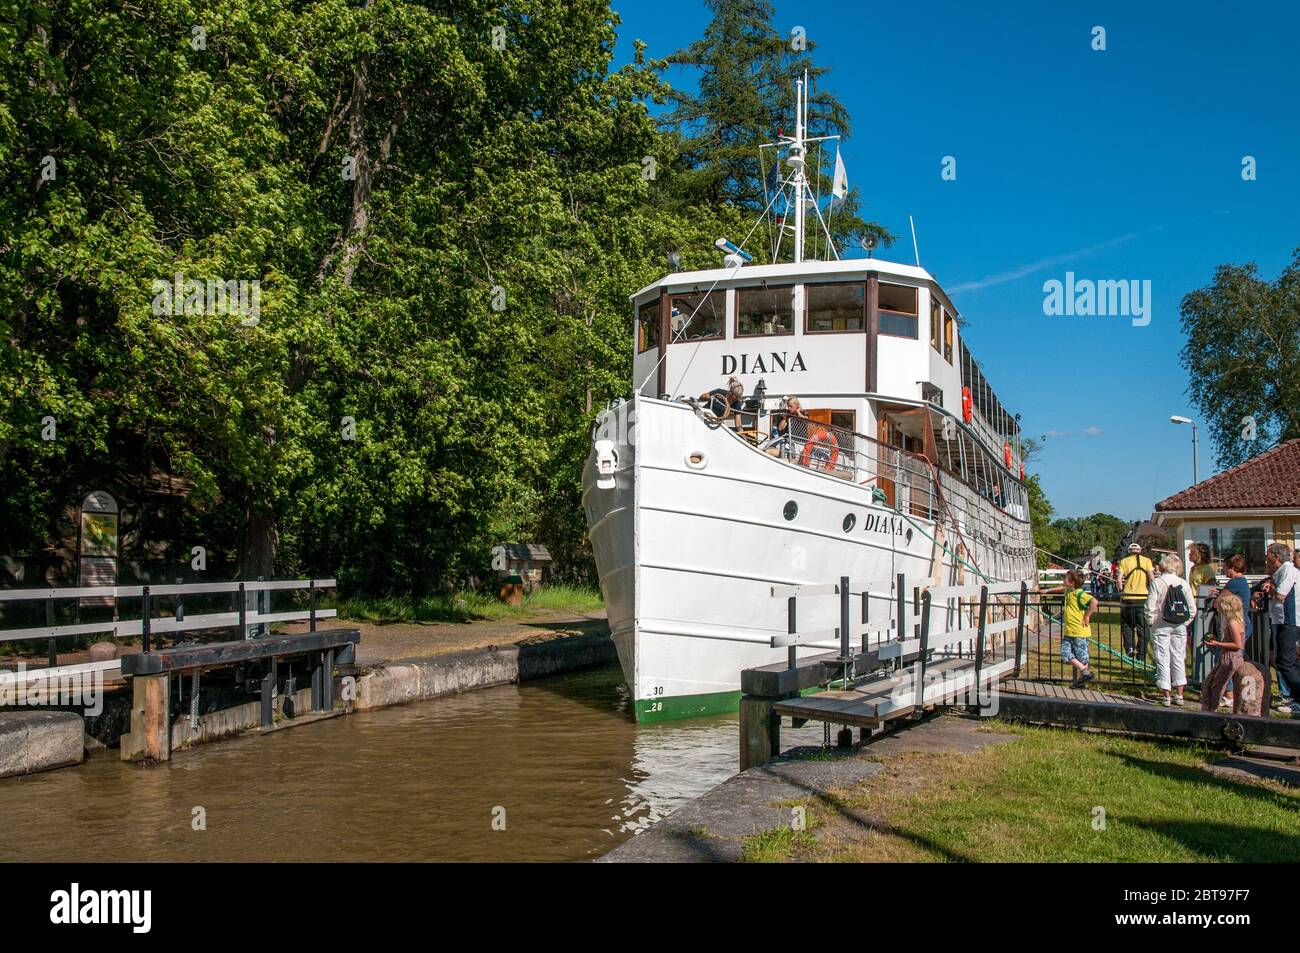 M/S Diana crusing Göta Canal on a sunny summer day in historic smalltown Söderköping, Sweden. The ship was built in 1931. Stock Photo